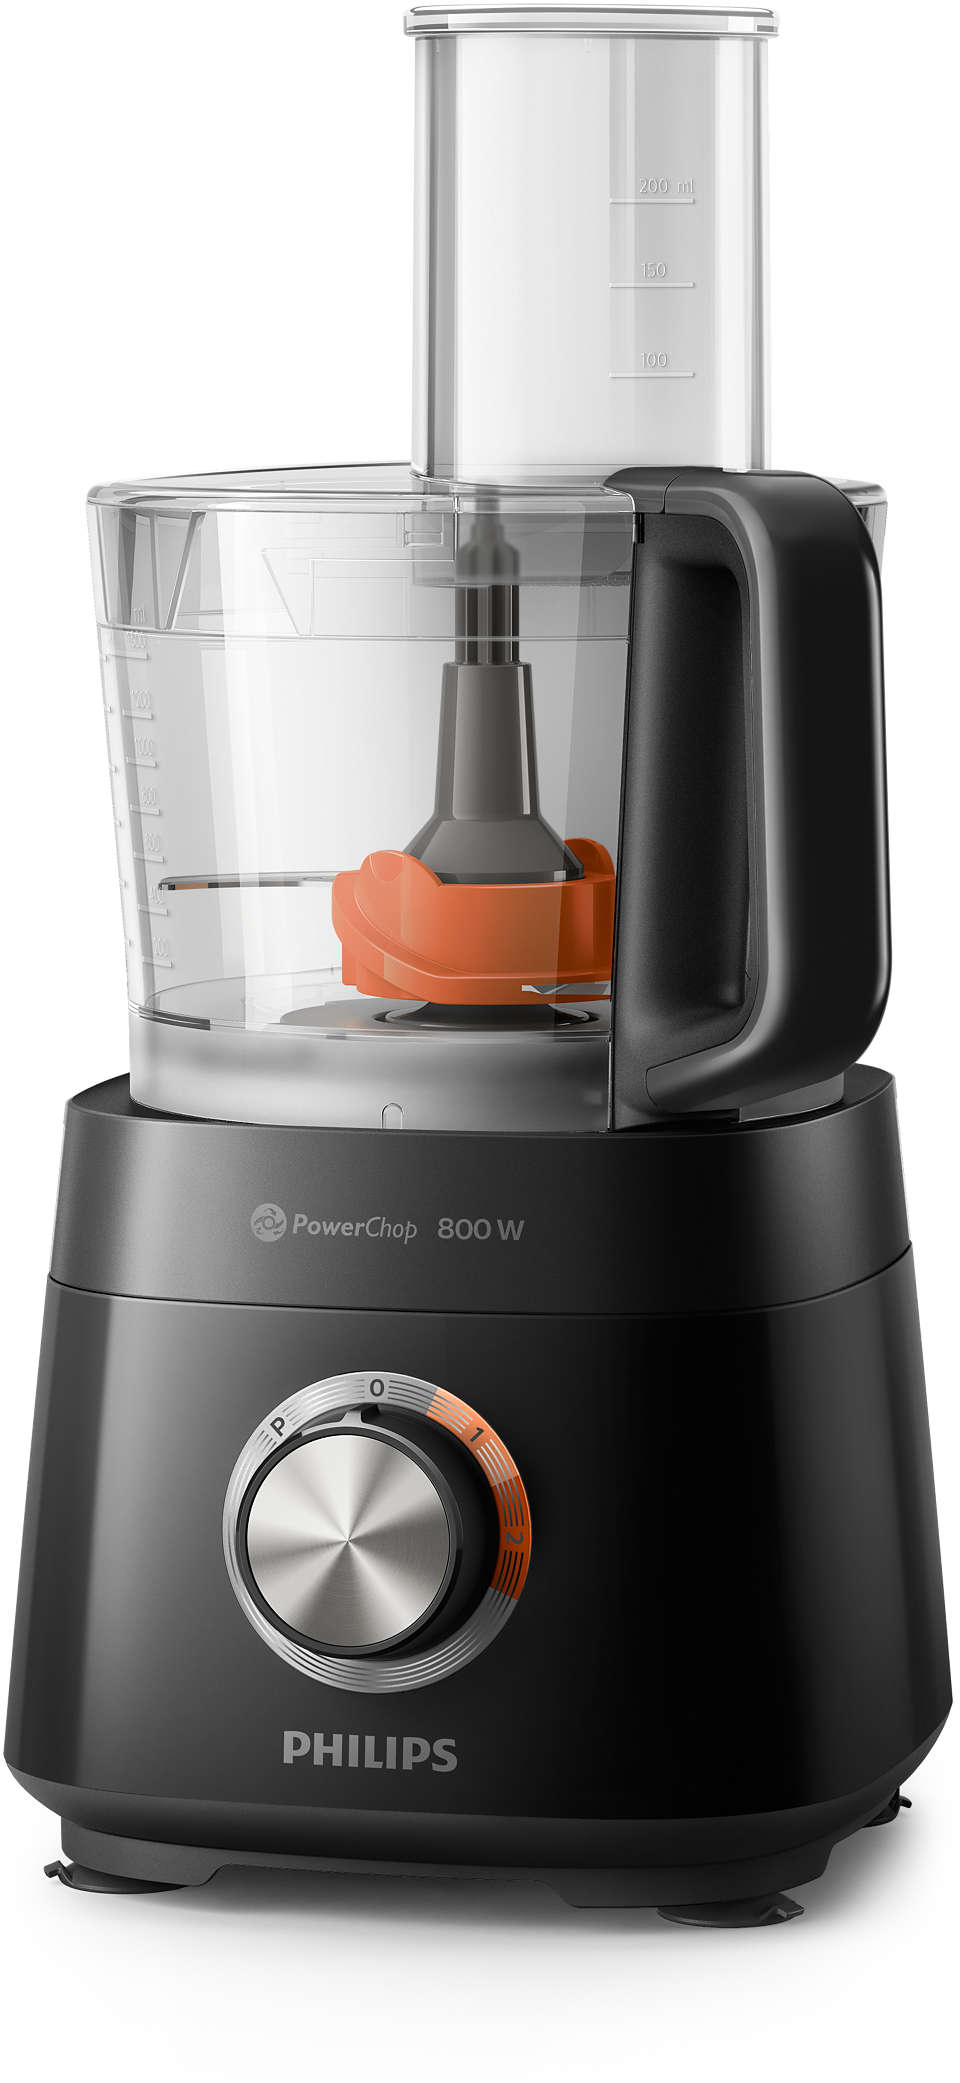 Philips - Compact food processor 800 W - Viva Collection